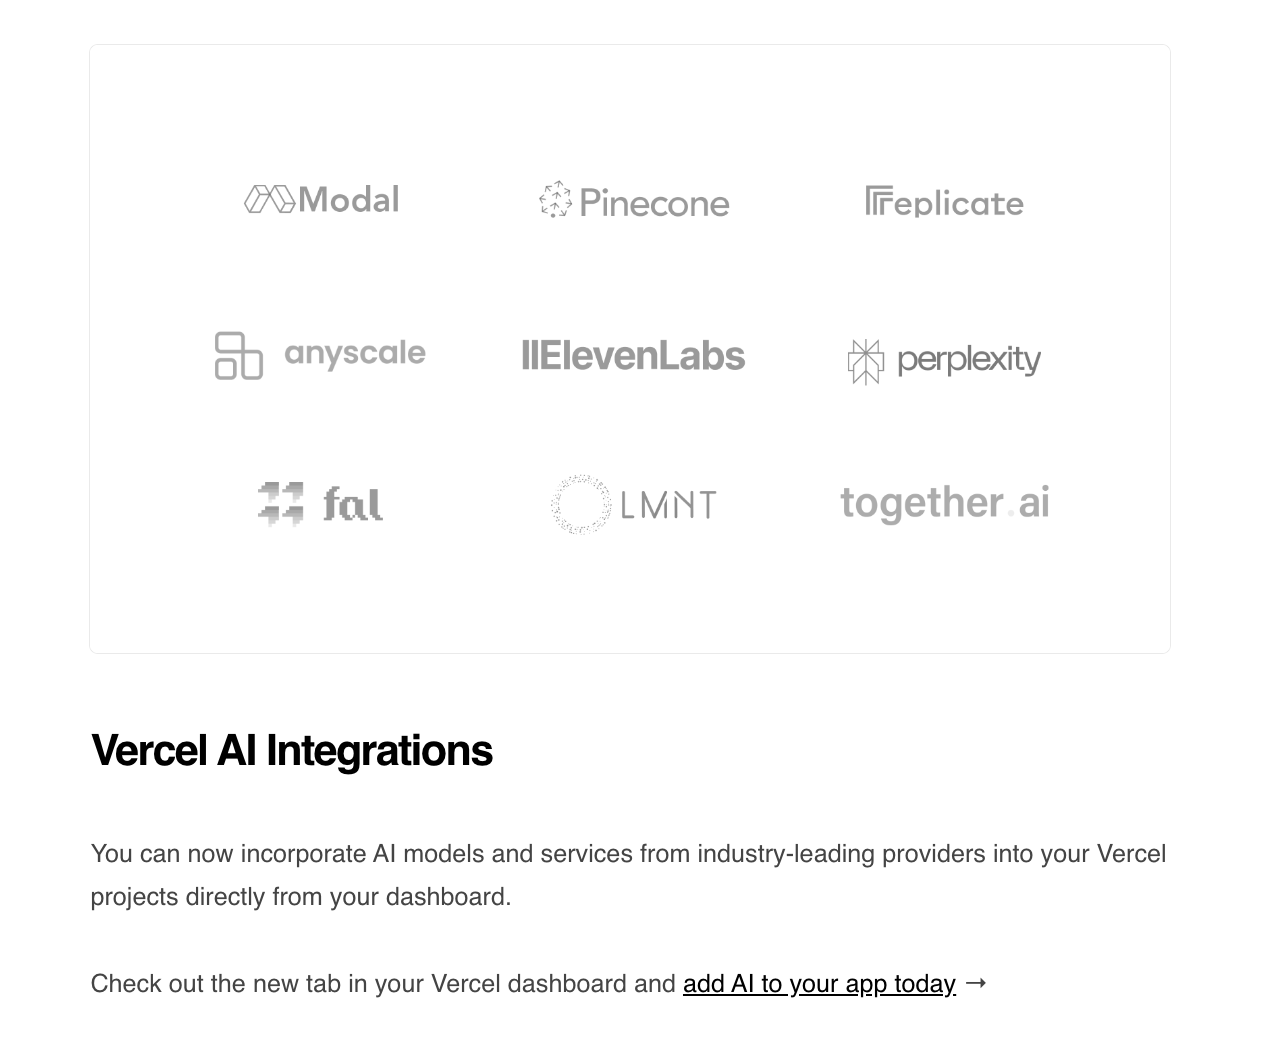 Email Marketing for Devtools: Screenshot of Vercel's email about their AI integrations